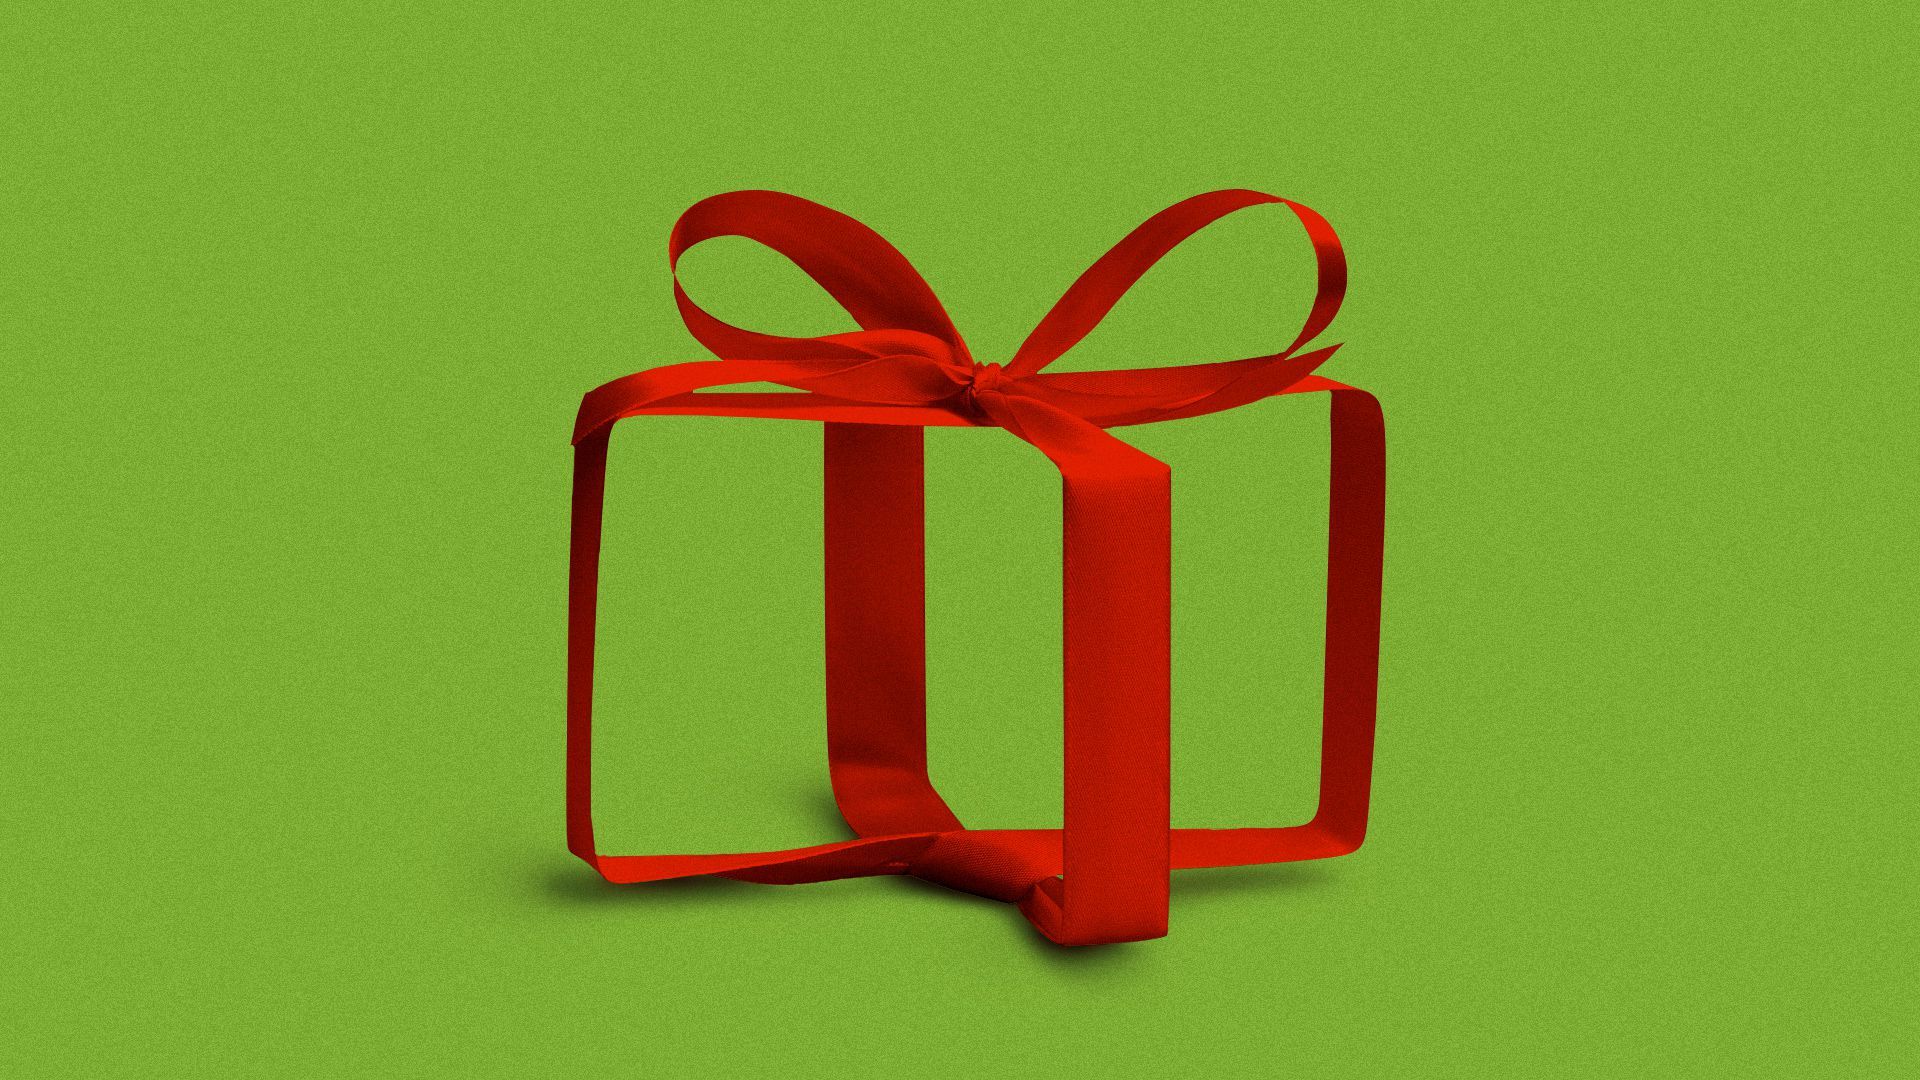 Illustration of the ribbons around a gift tied up without an actual gift box.  